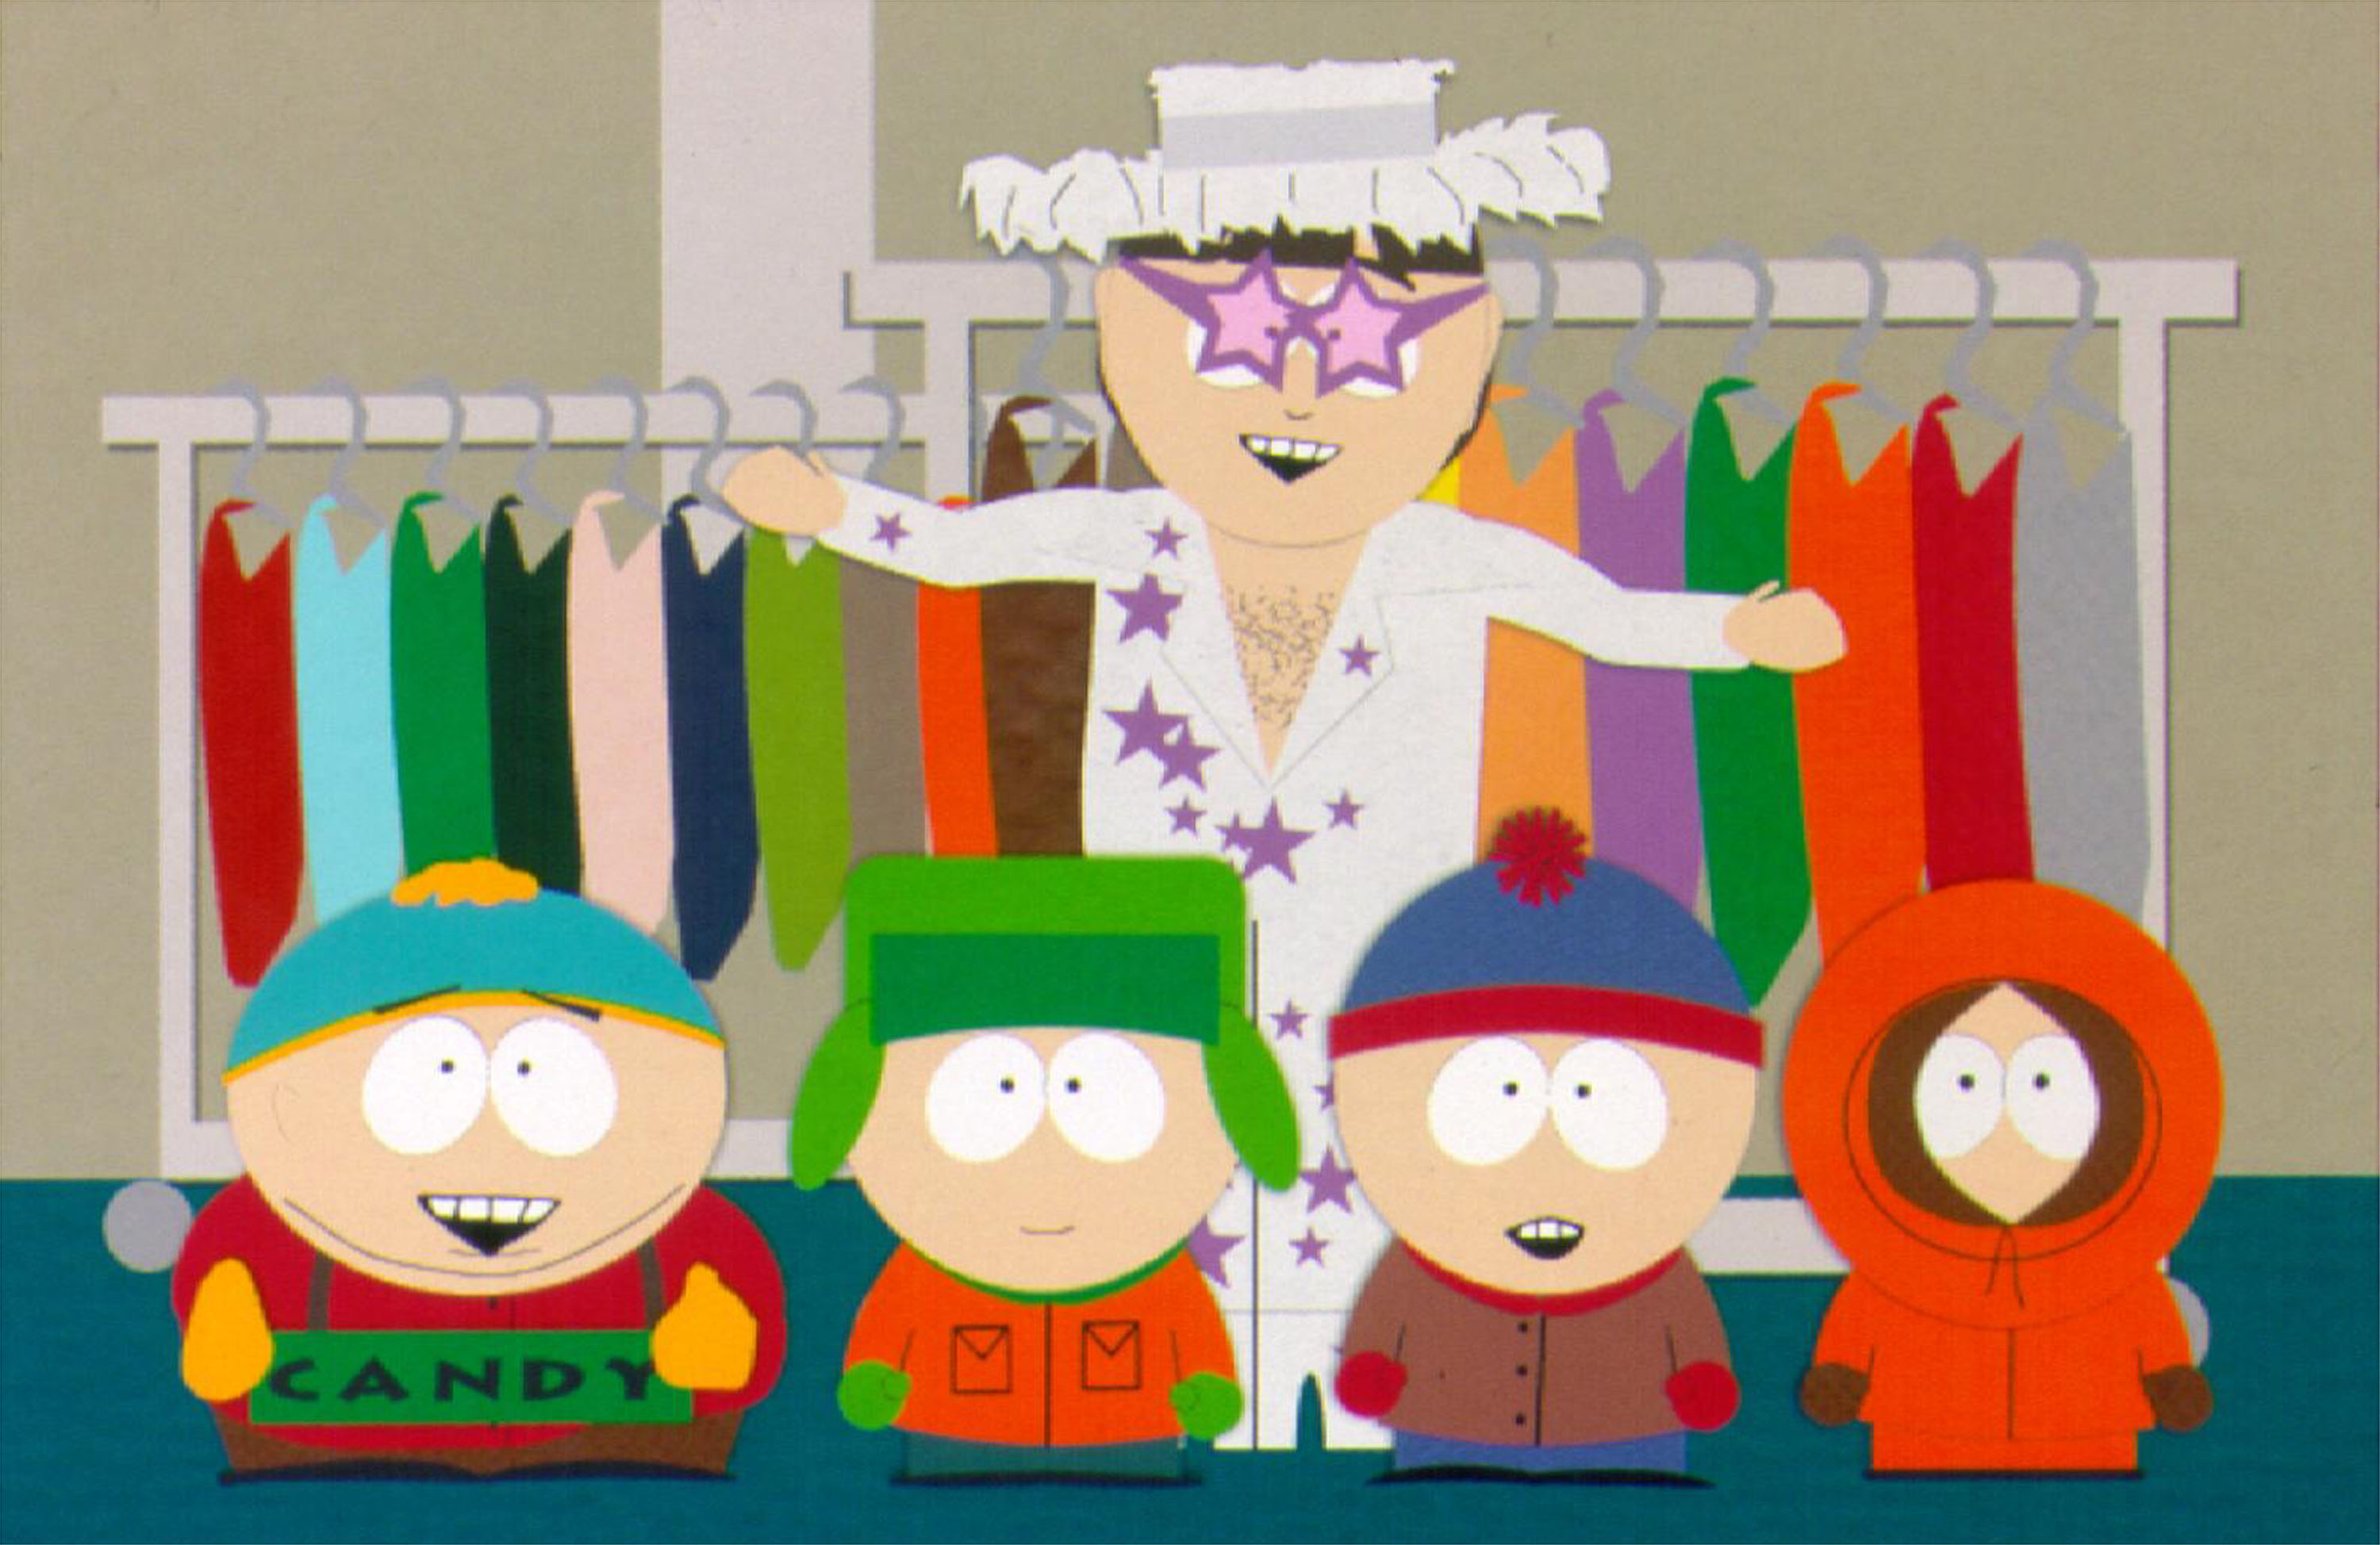 Cartoon TV show "South Park", including Elton John (rear) with (from L to R) Kenny, Stan, Kyle and Cartman are featured in a 1998 episode